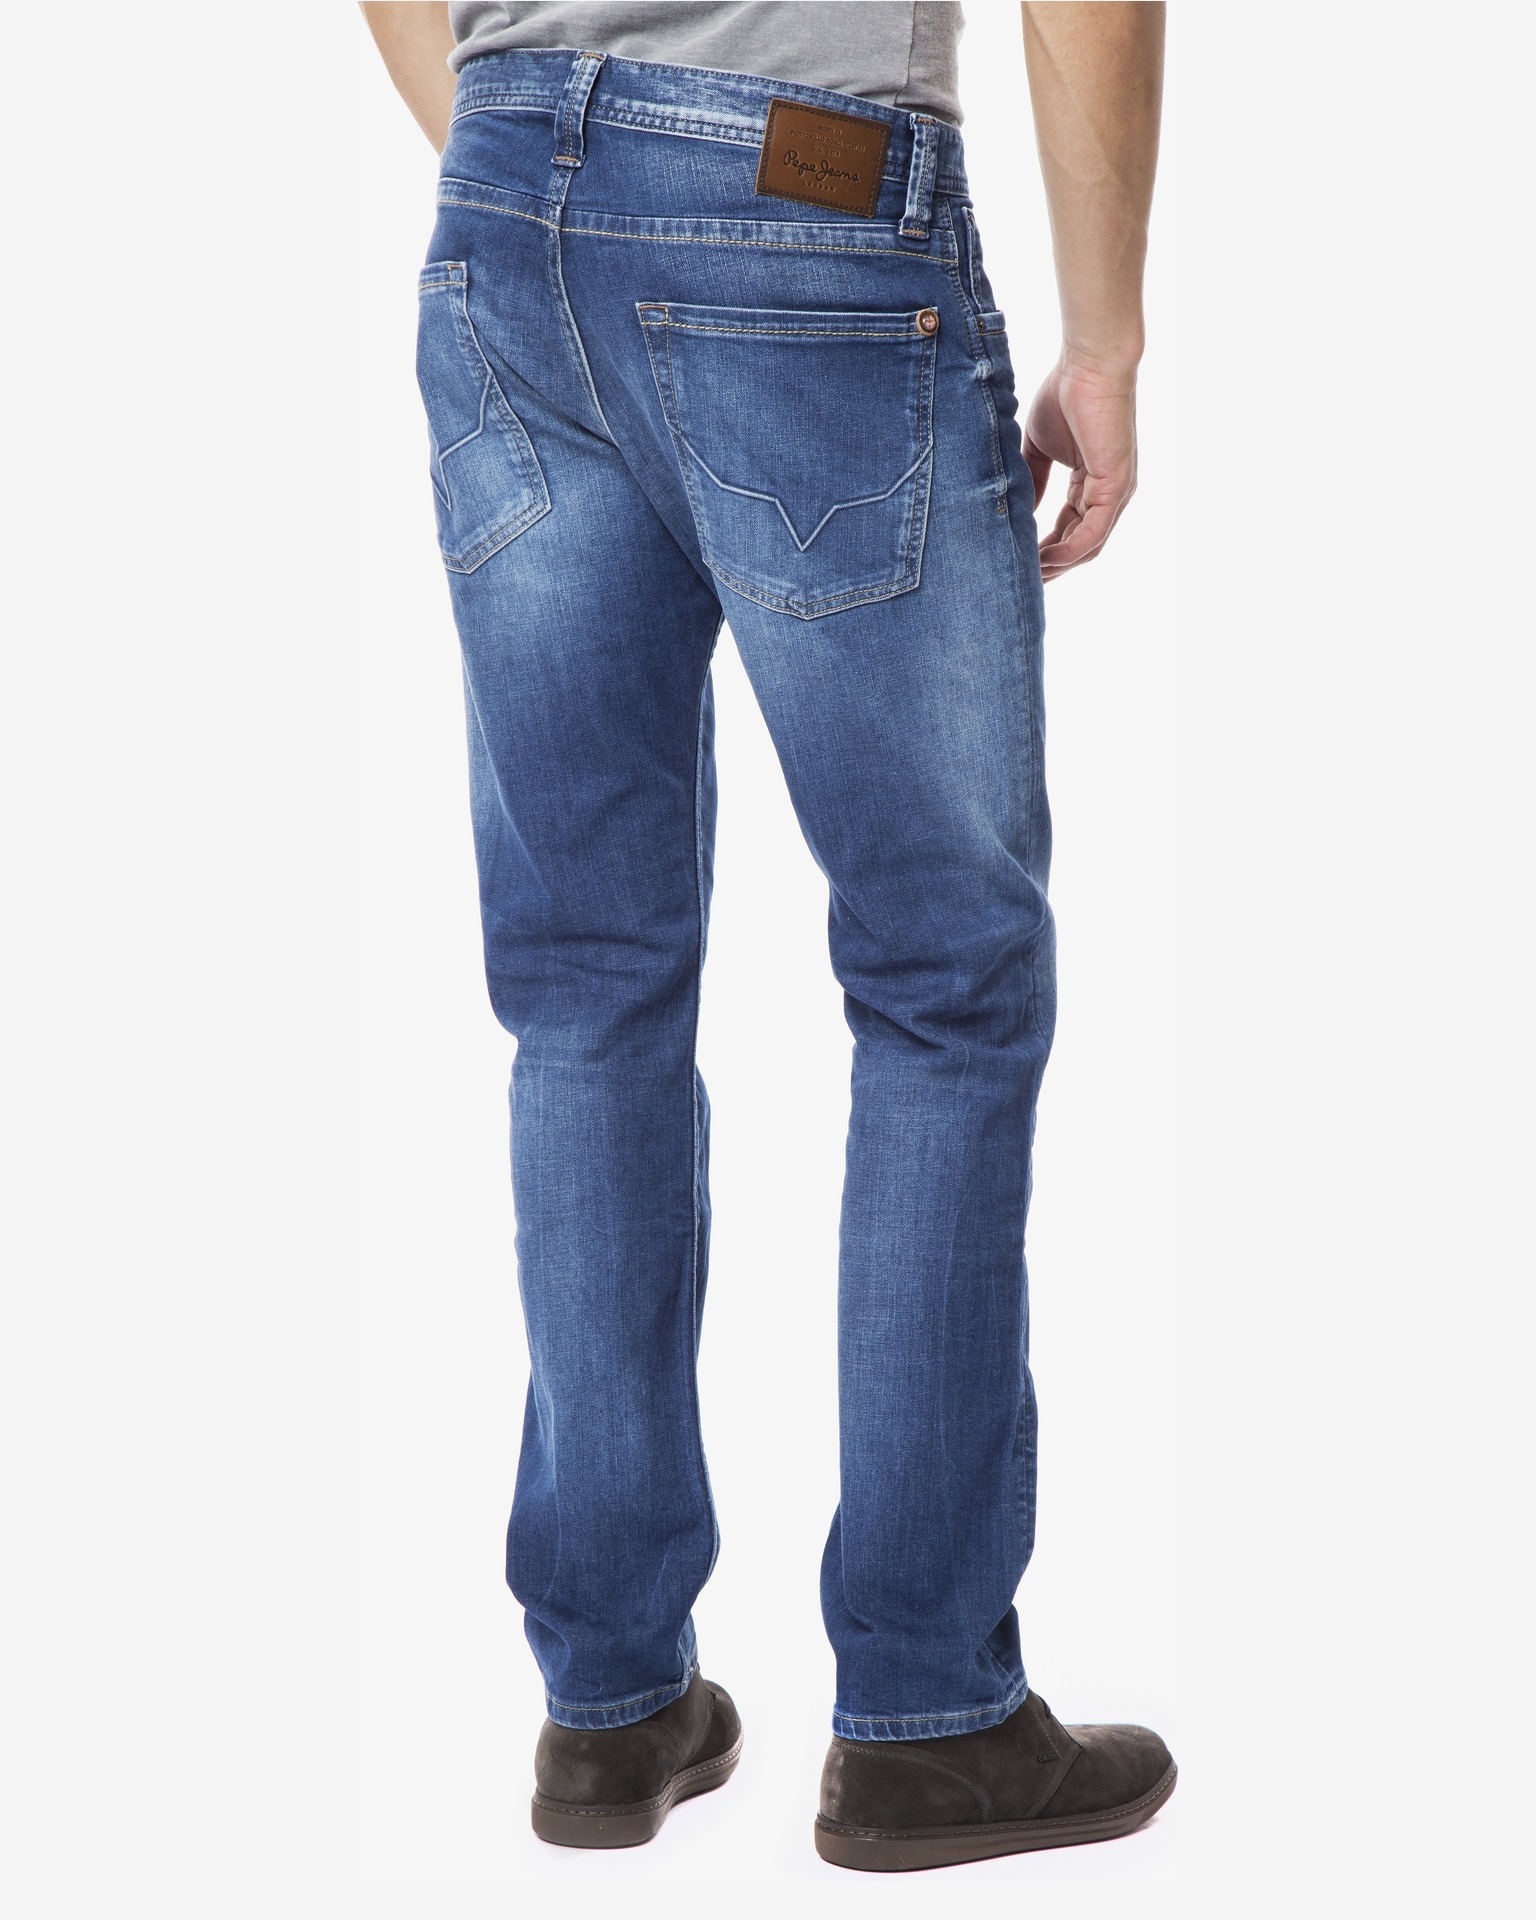 mike comfort fit jeans